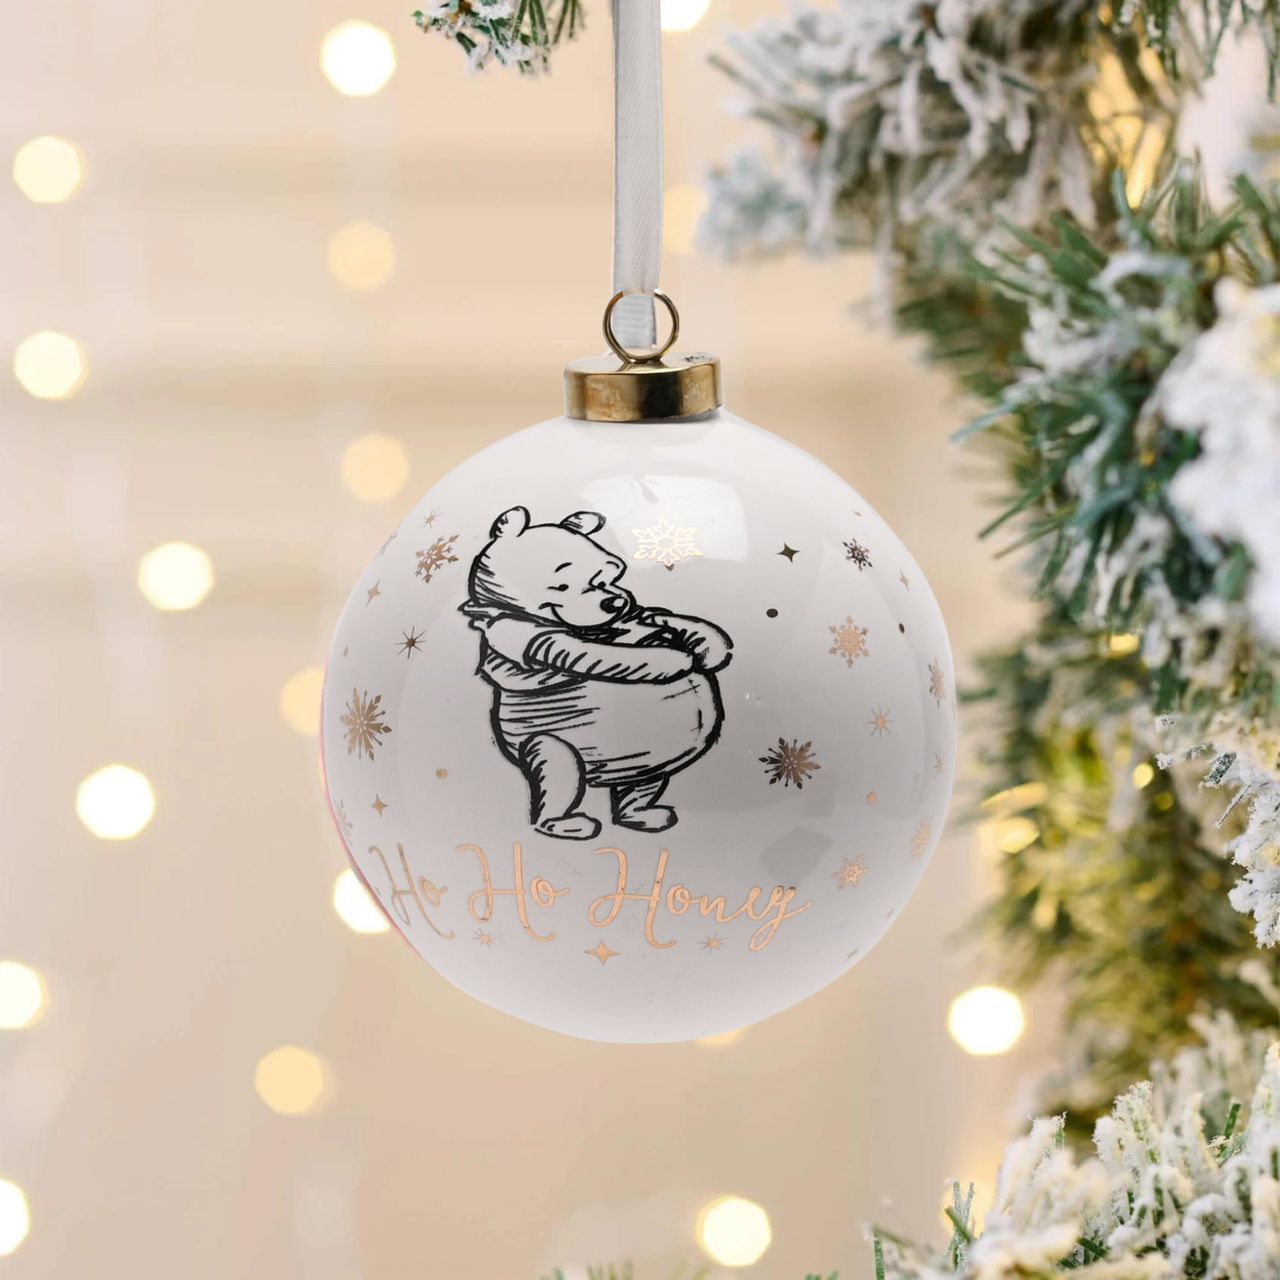 Disney Ceramic Christmas Bauble Winnie the Pooh  Bring touch of timeless Disney magic to the Christmas tree with this elegant gold foiled ceramic collectable Winnie the Pooh bauble. From Disney Classic Collectables - luxurious collectable gifts for the enduring Disney fan.